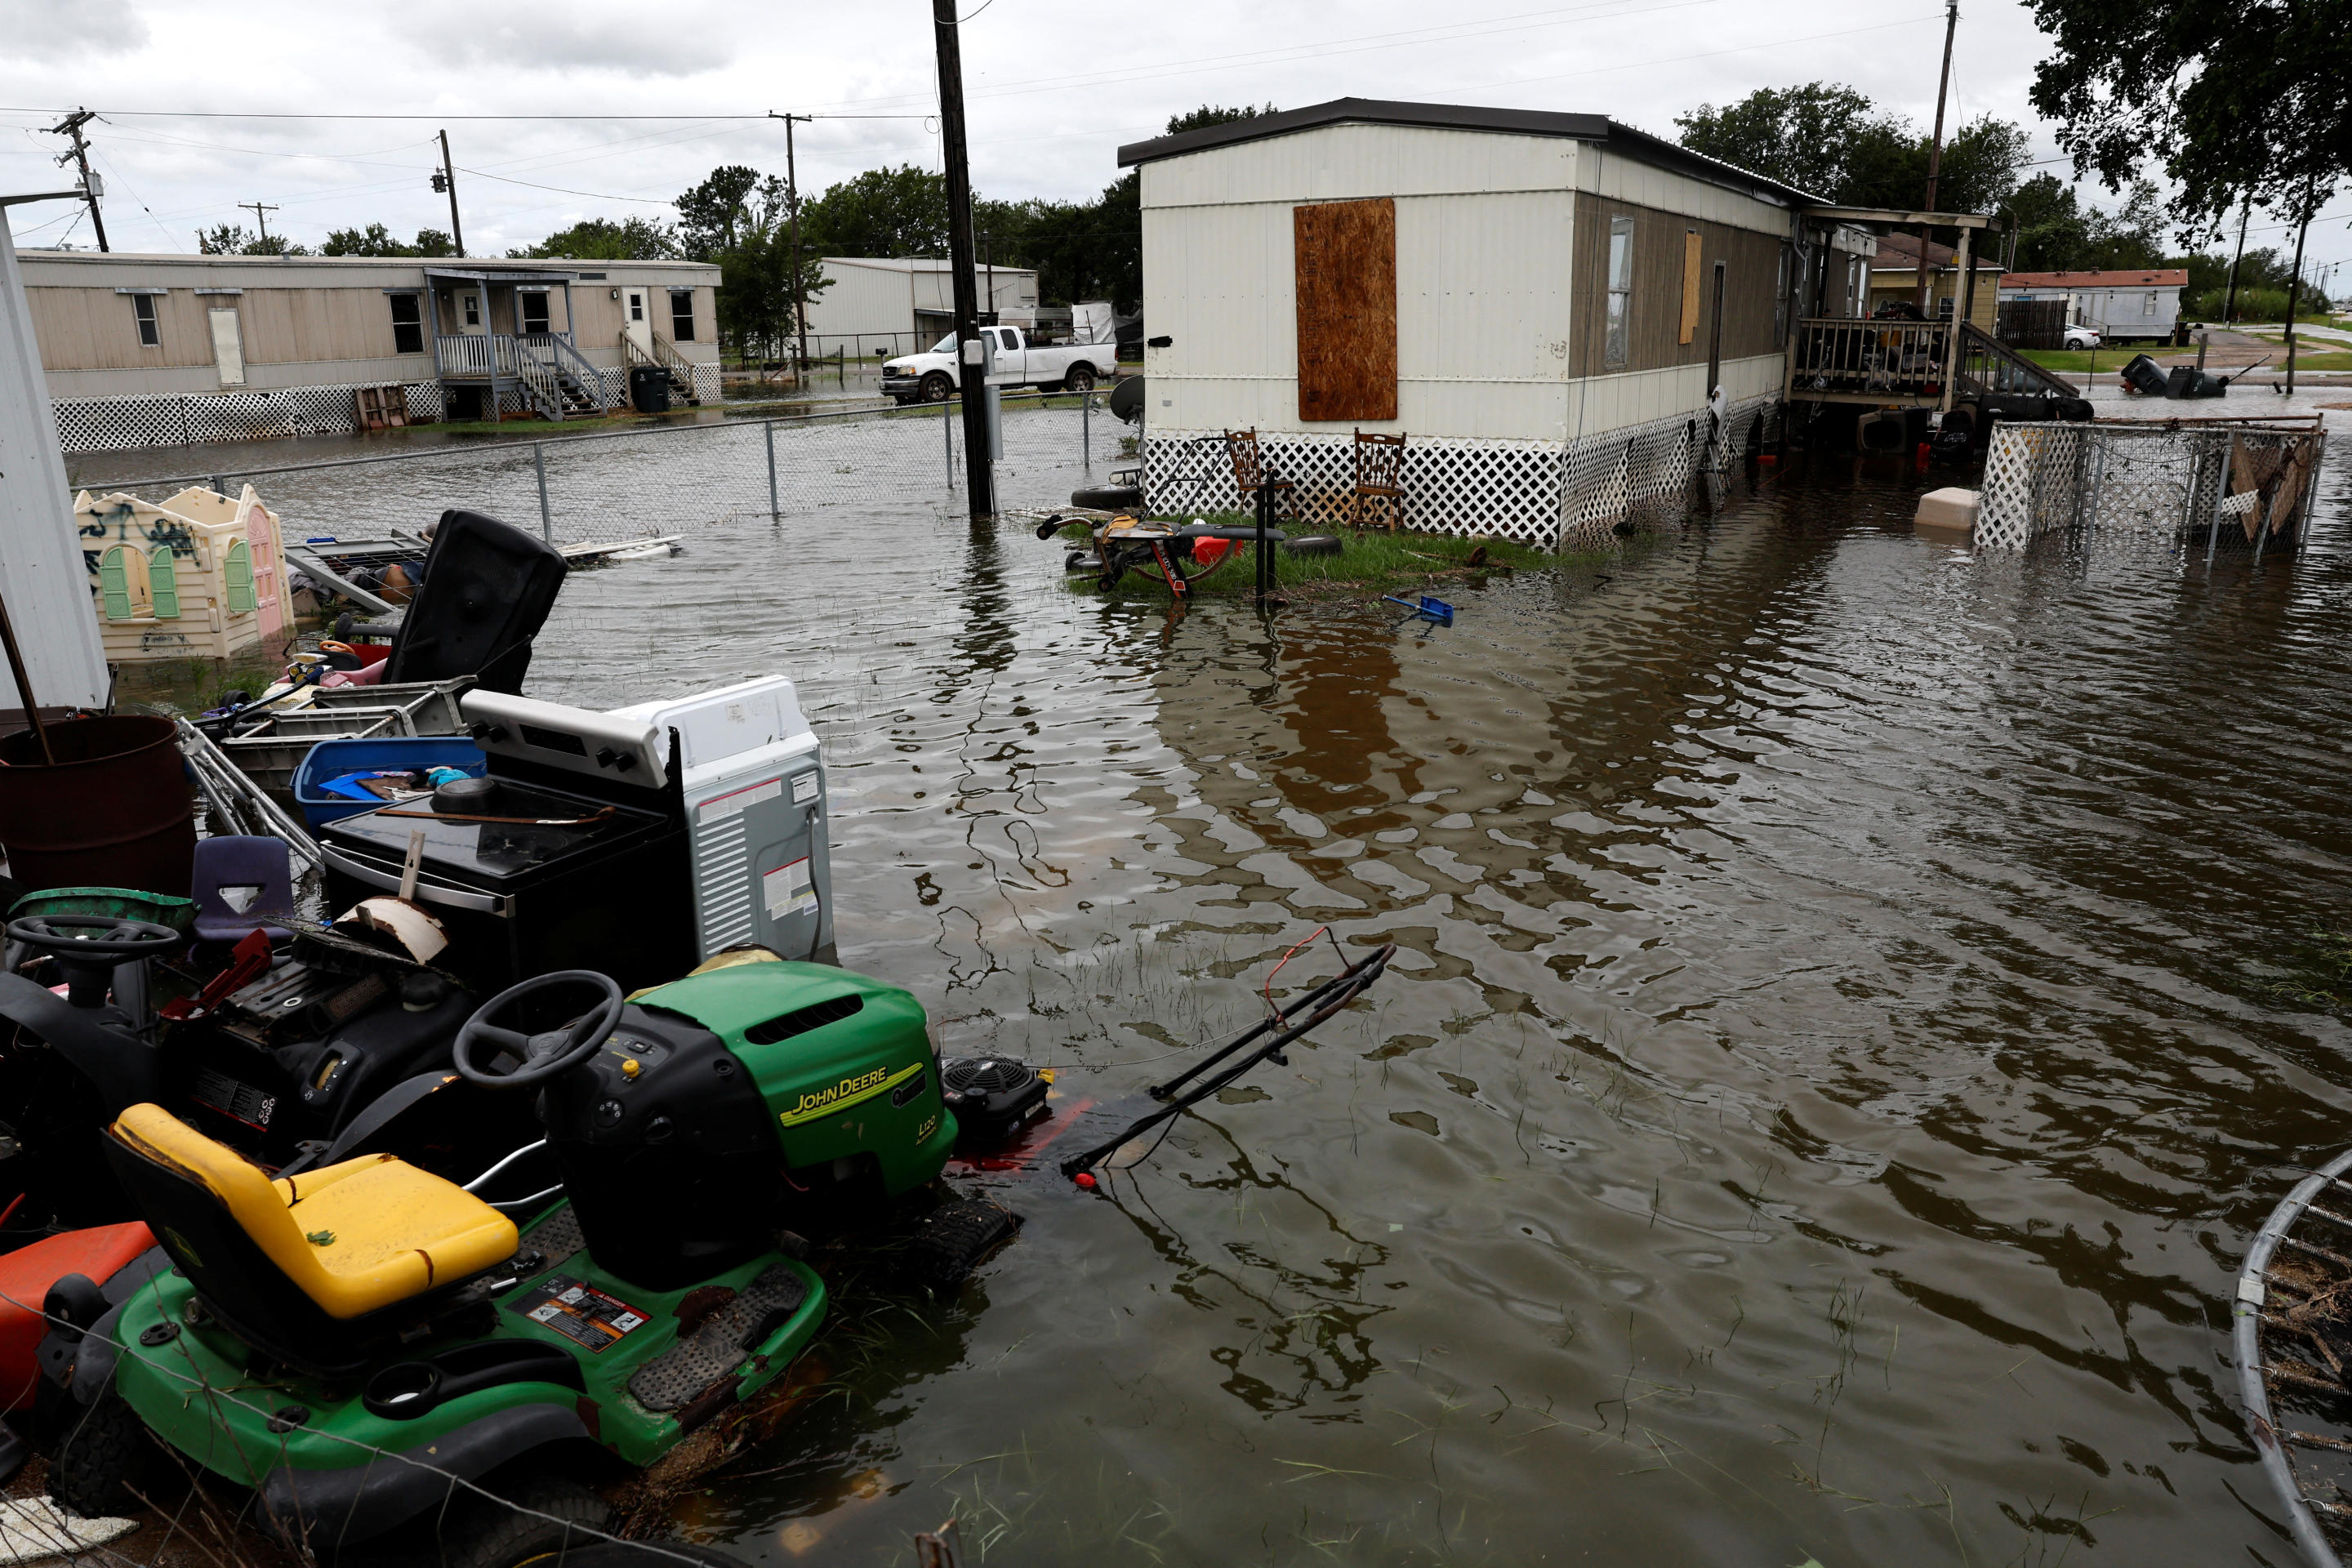 A flooded street in the aftermath of Hurricane Beryl in El Campo, Texas, on Monday.